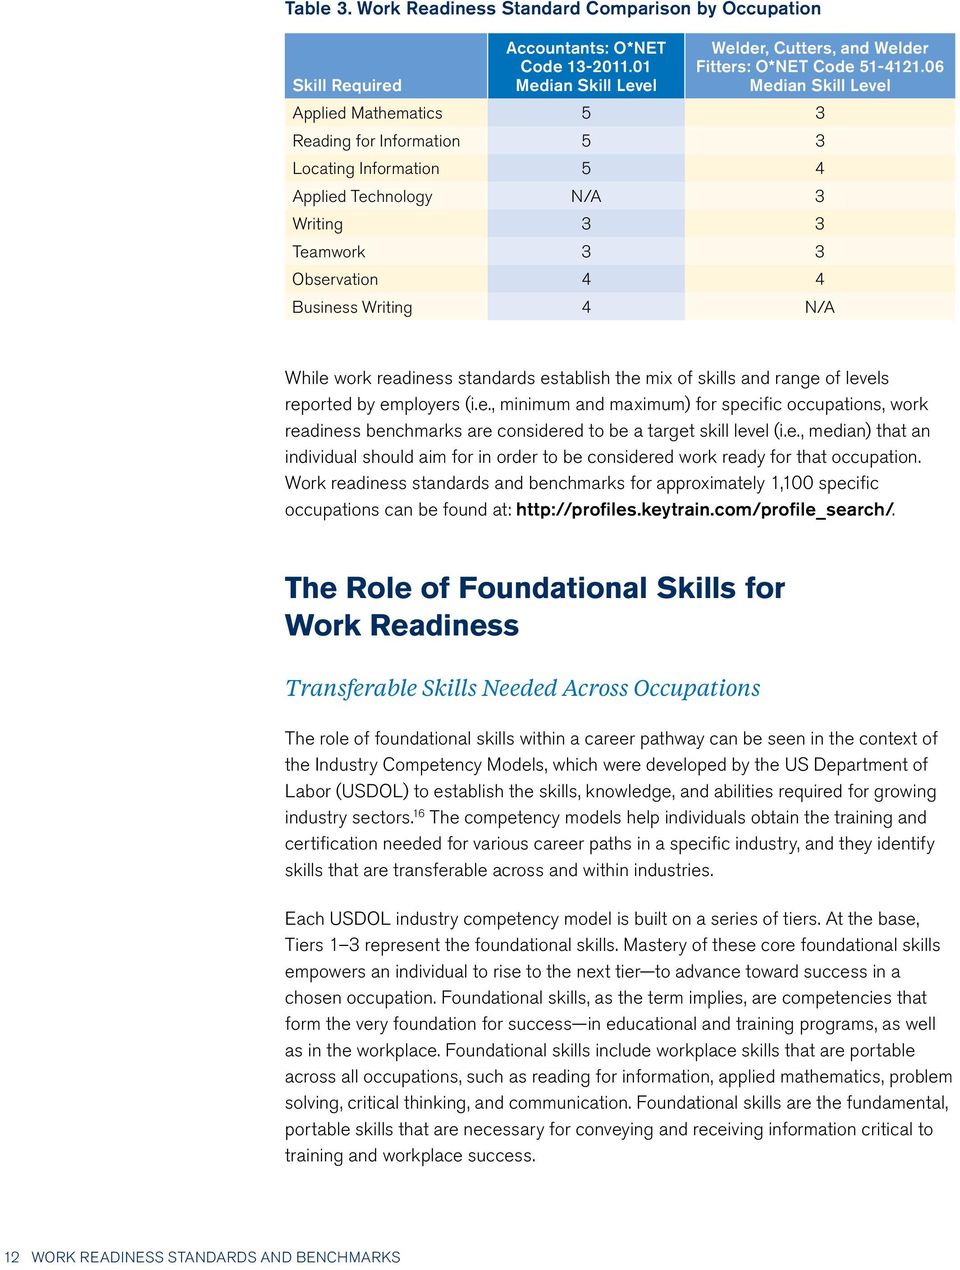 readiness standards establish the mix of skills and range of levels reported by employers (i.e., minimum and maximum) for specific occupations, work readiness benchmarks are considered to be a target skill level (i.